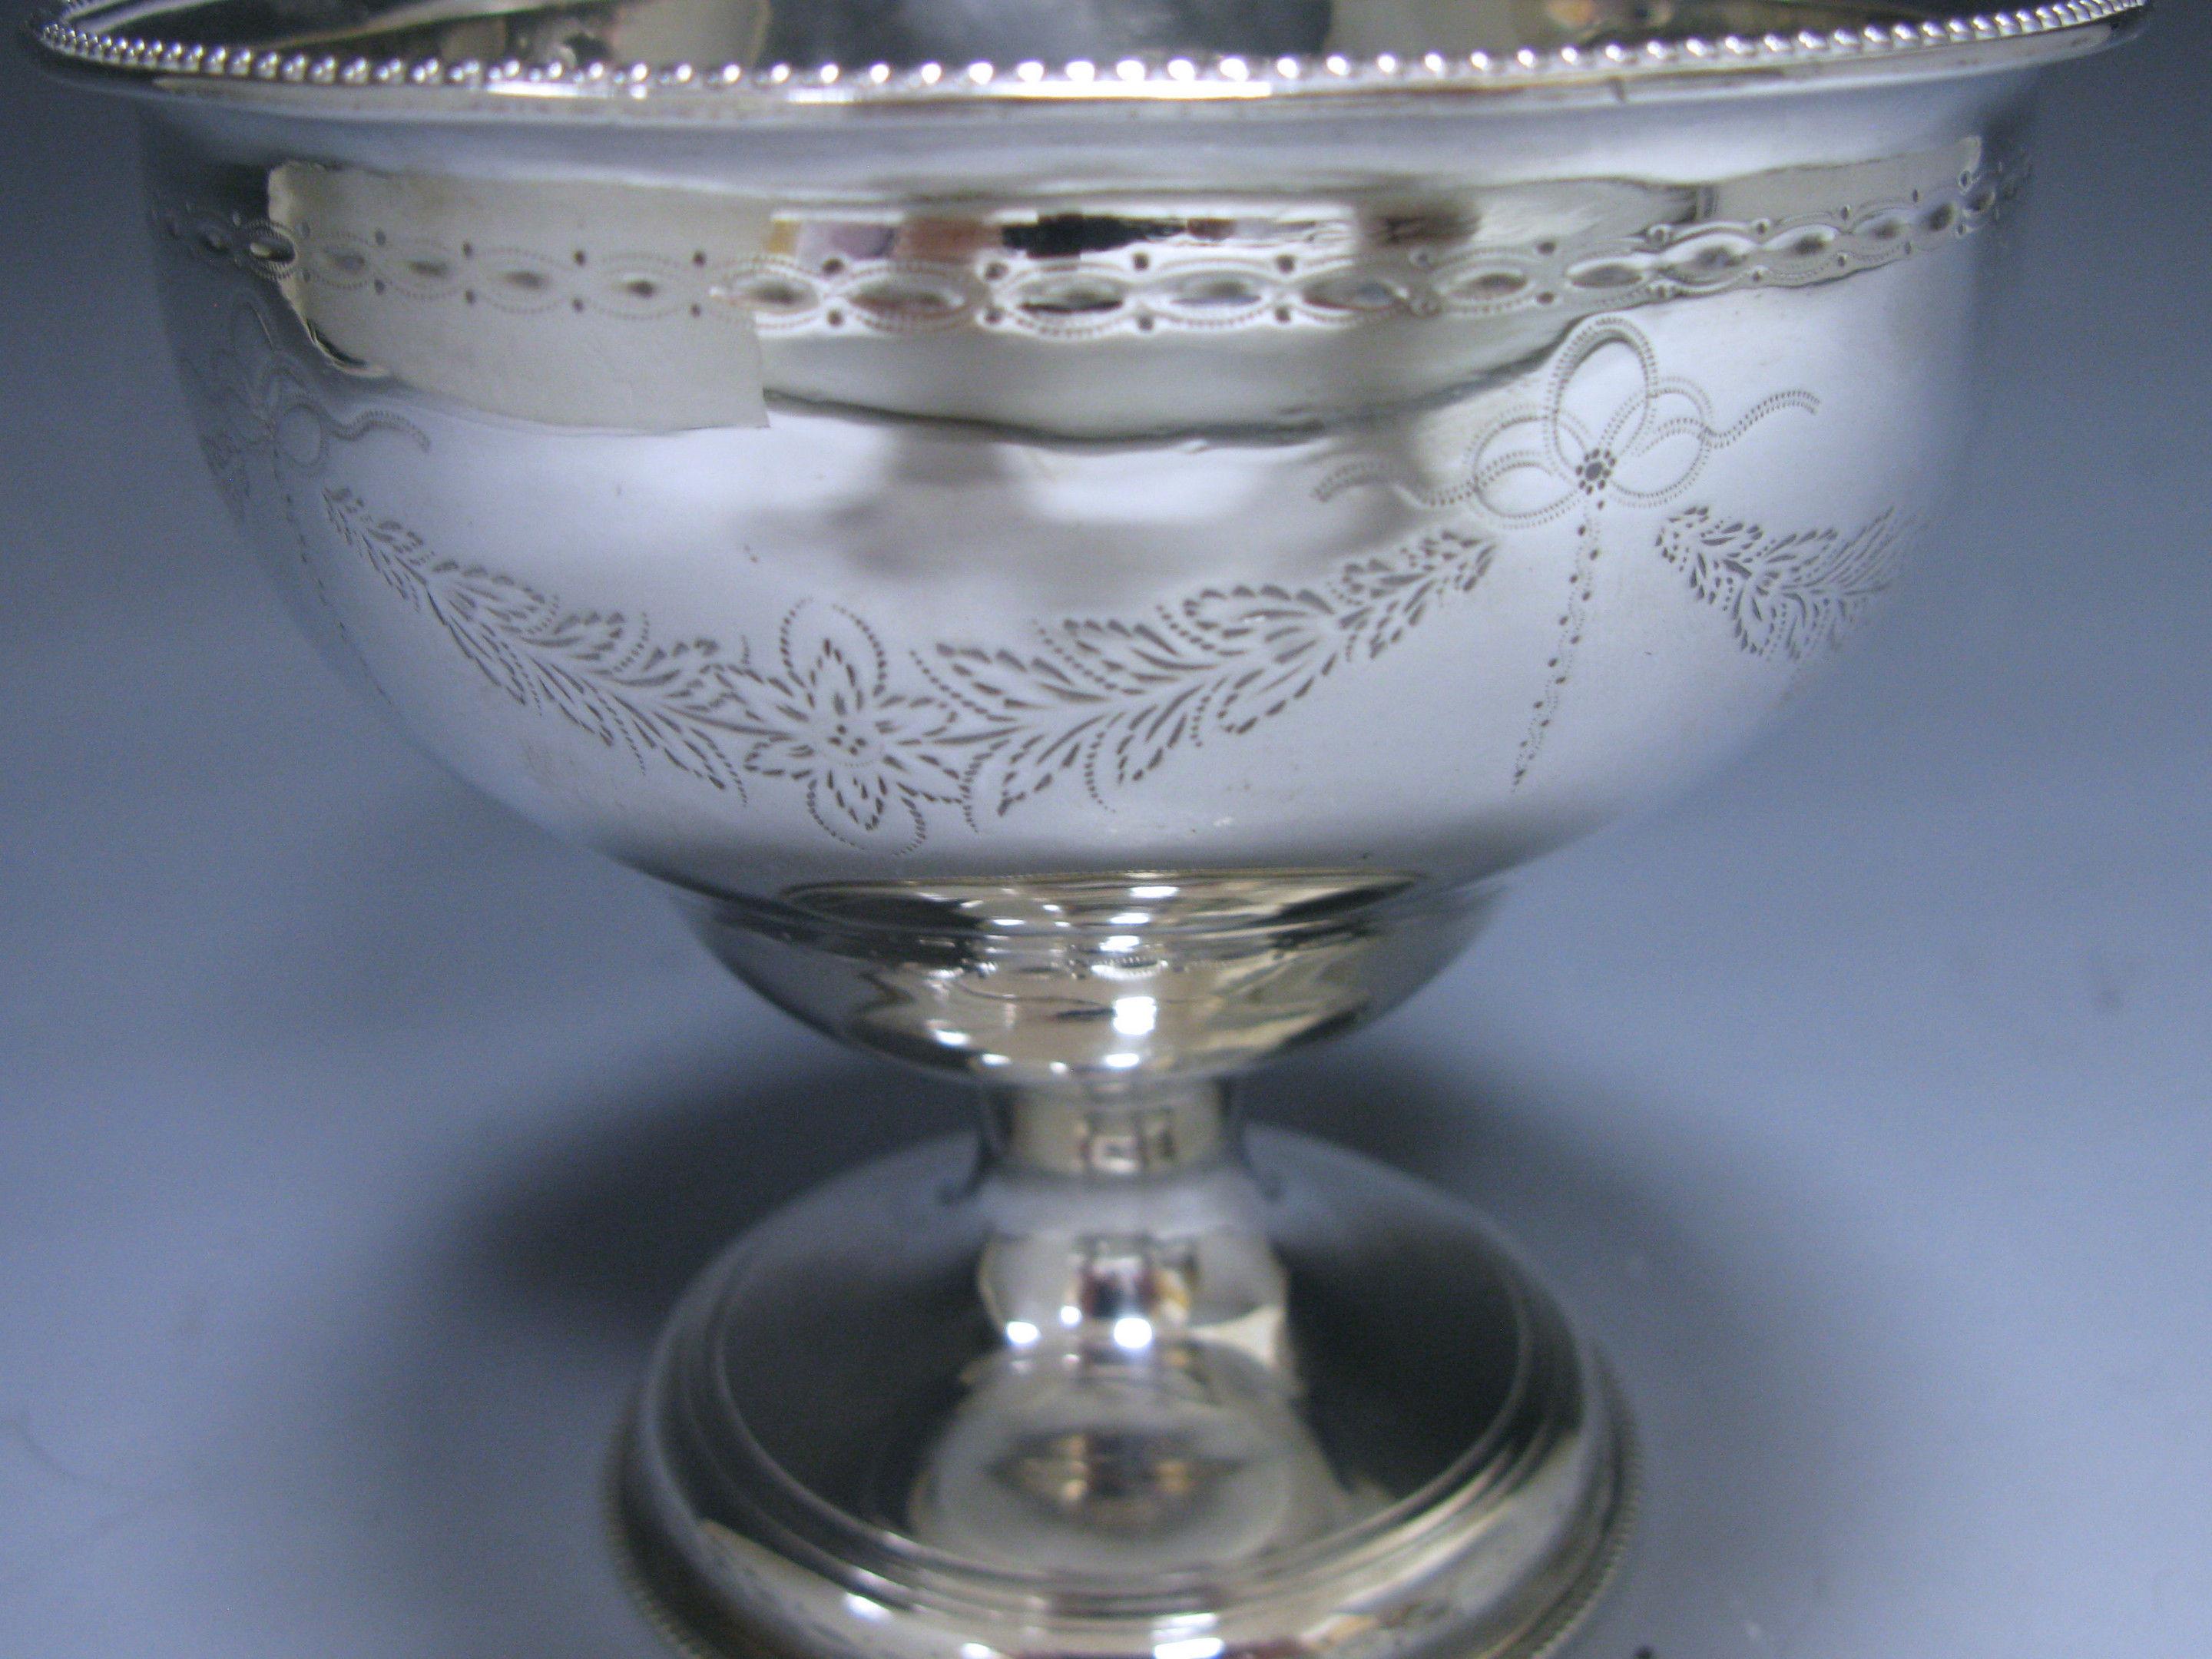 A charming George III Irish silver pedestal sugar bowl, with bright engraved decoration and beaded borders. There is a family crest engraved on the main body.

Measures: Diameter 5 inches 12.7 cm
Height 4.5 inches 11.4 cm.